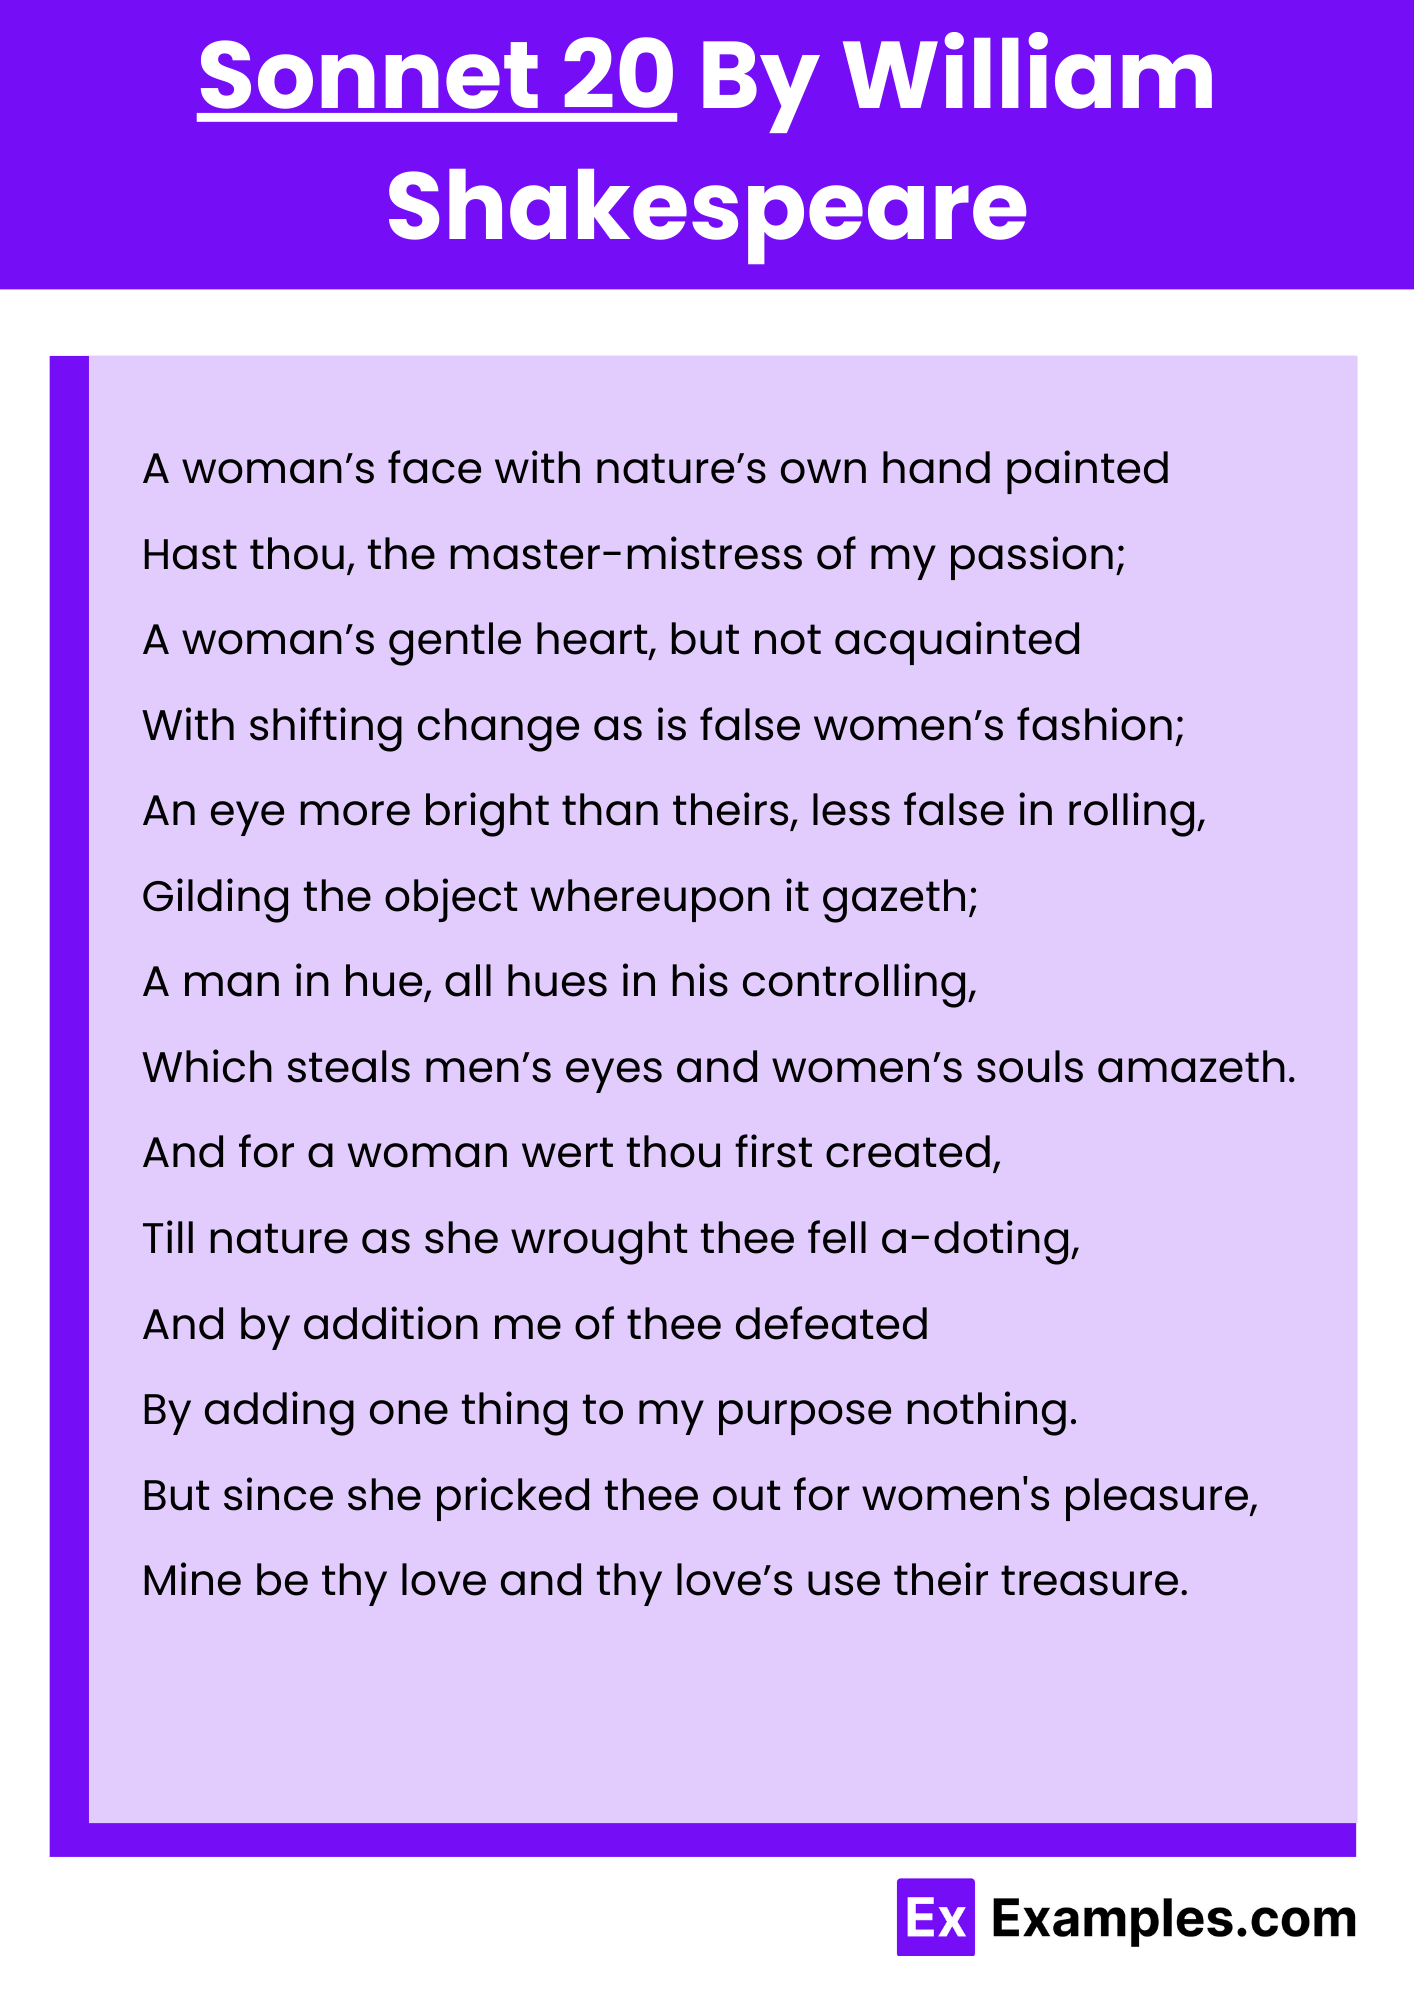 Sonnet 20 By William Shakespeare